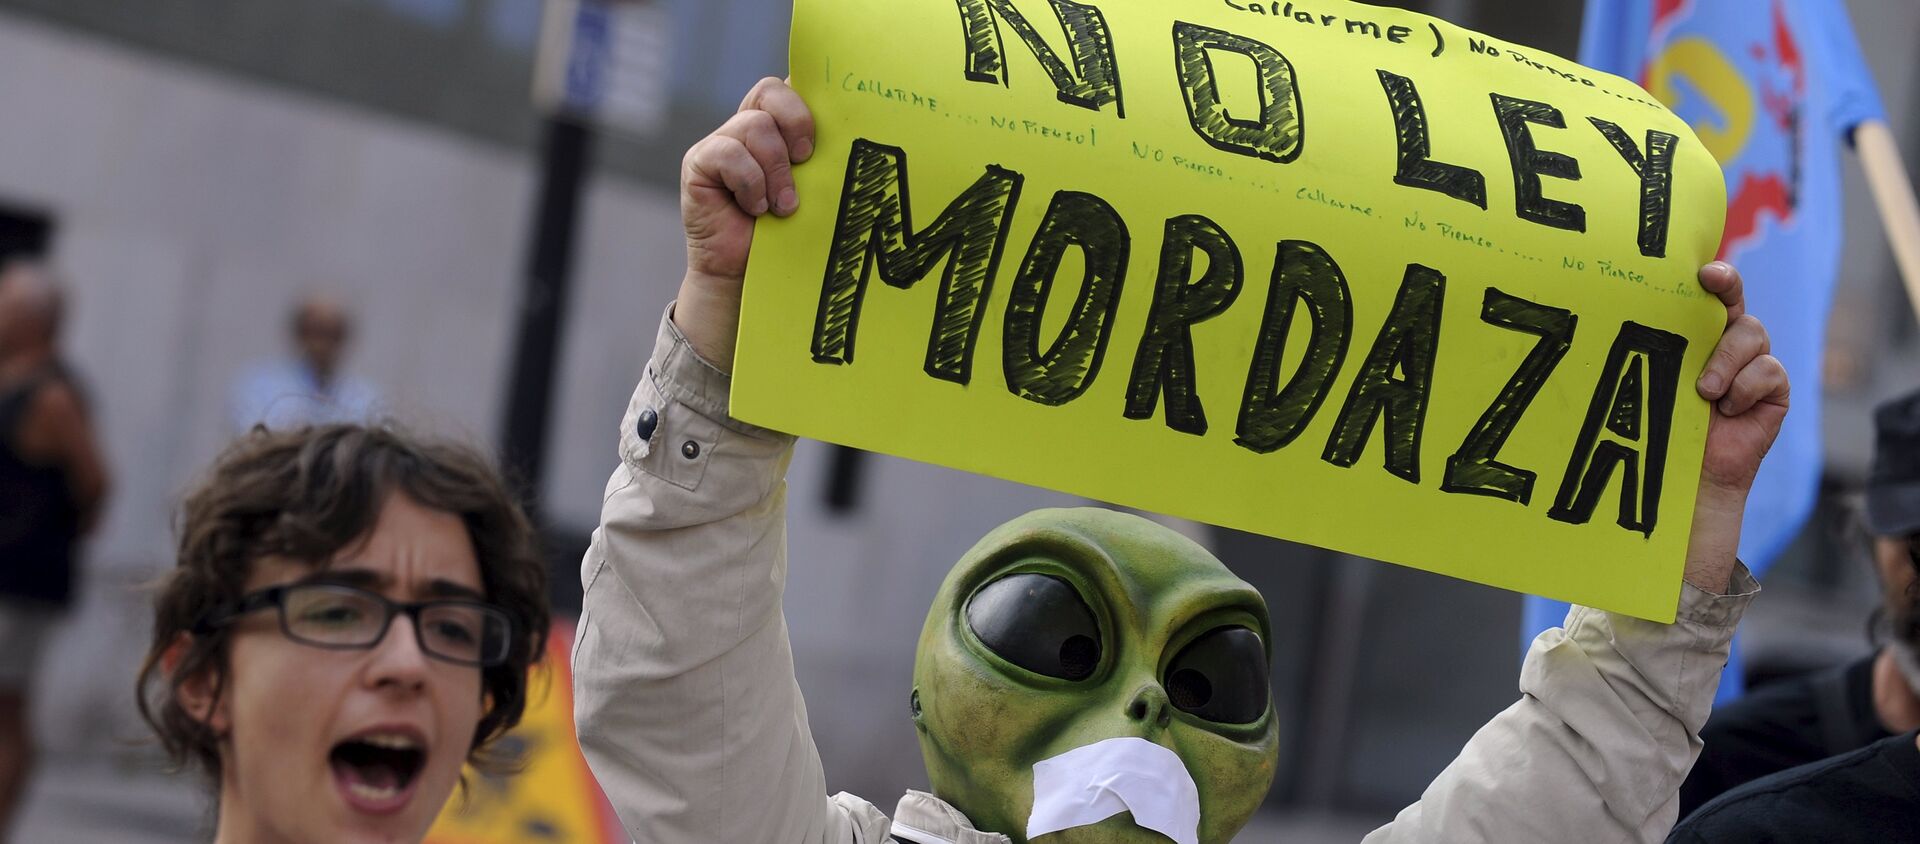 A man wearing a mask with a tape over the mouth holds up a sign during a protest against the Spanish government's new security law in Gijon, northern Spain, June 30, 2015. - Sputnik Mundo, 1920, 24.05.2016